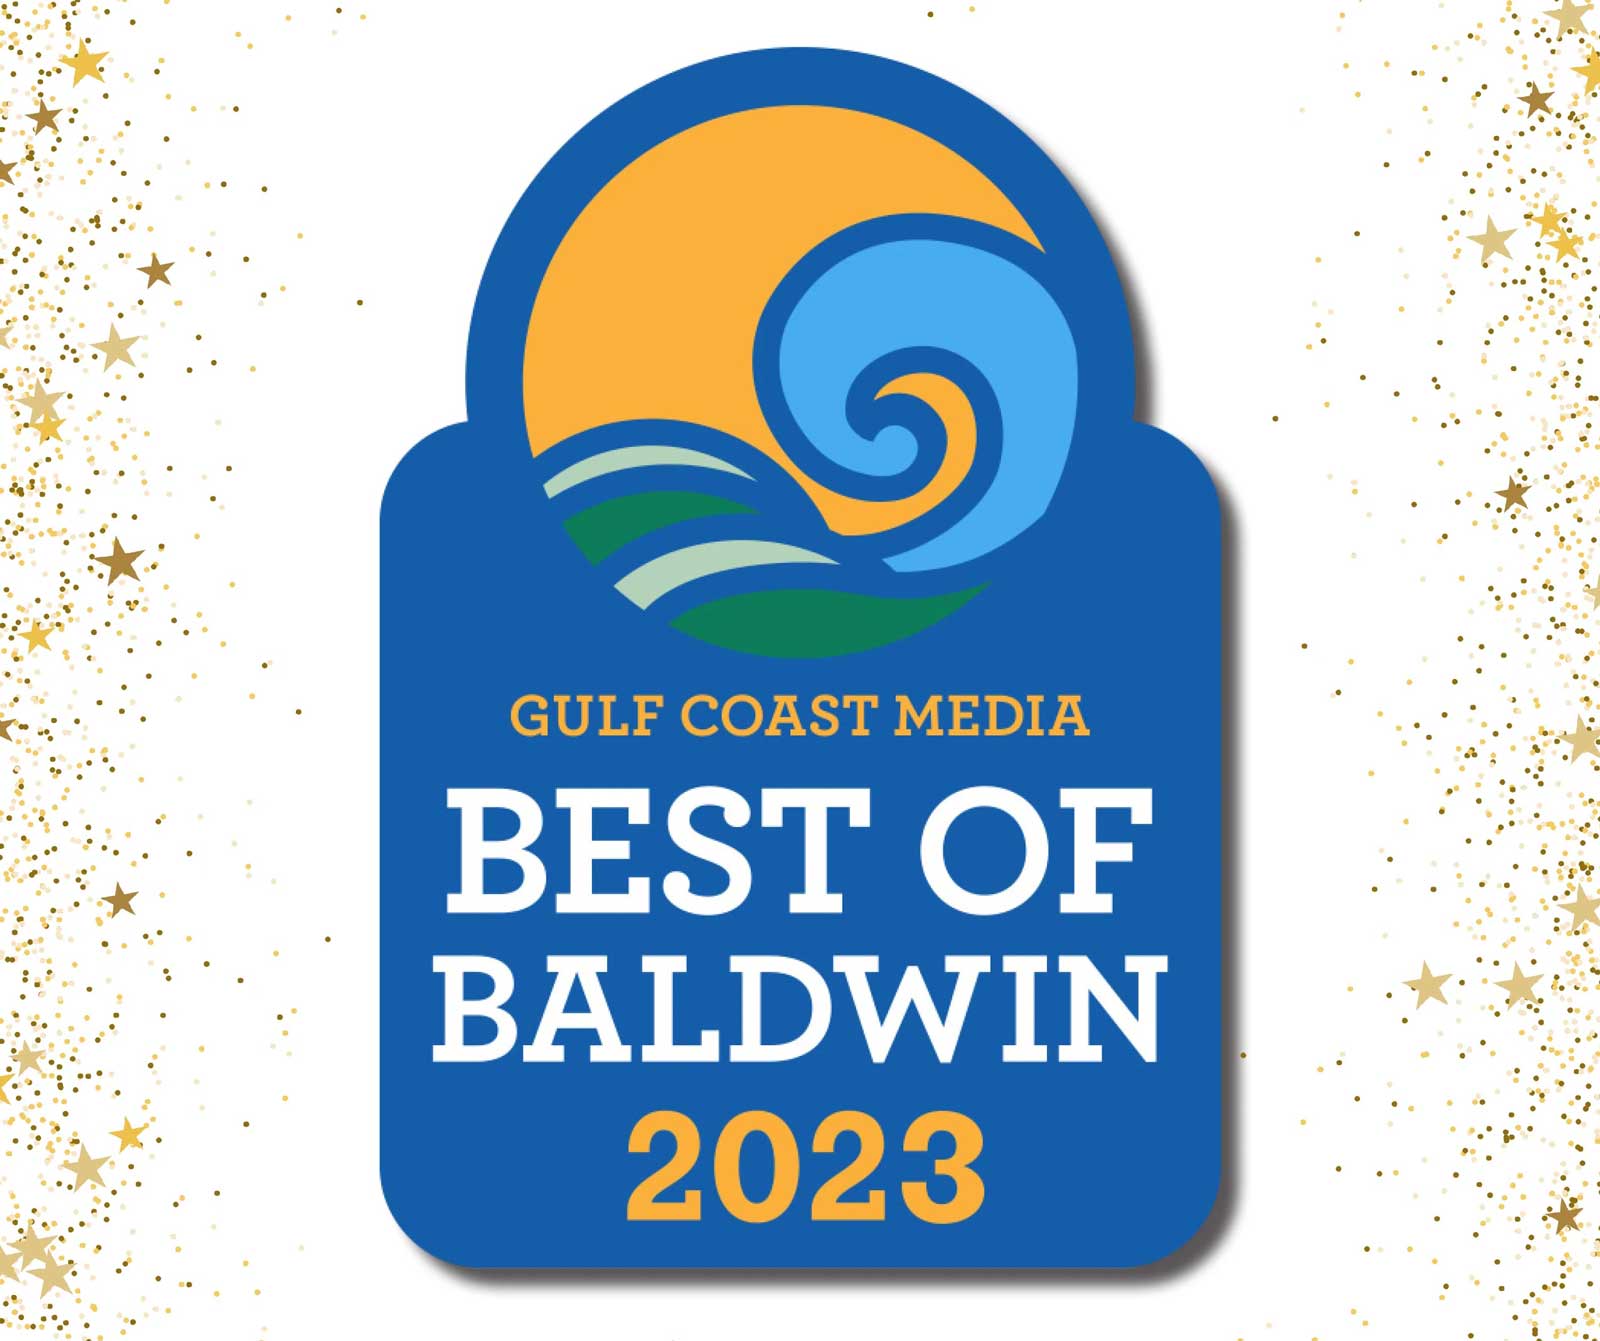 Best Of Baldwin Sees Record Voting